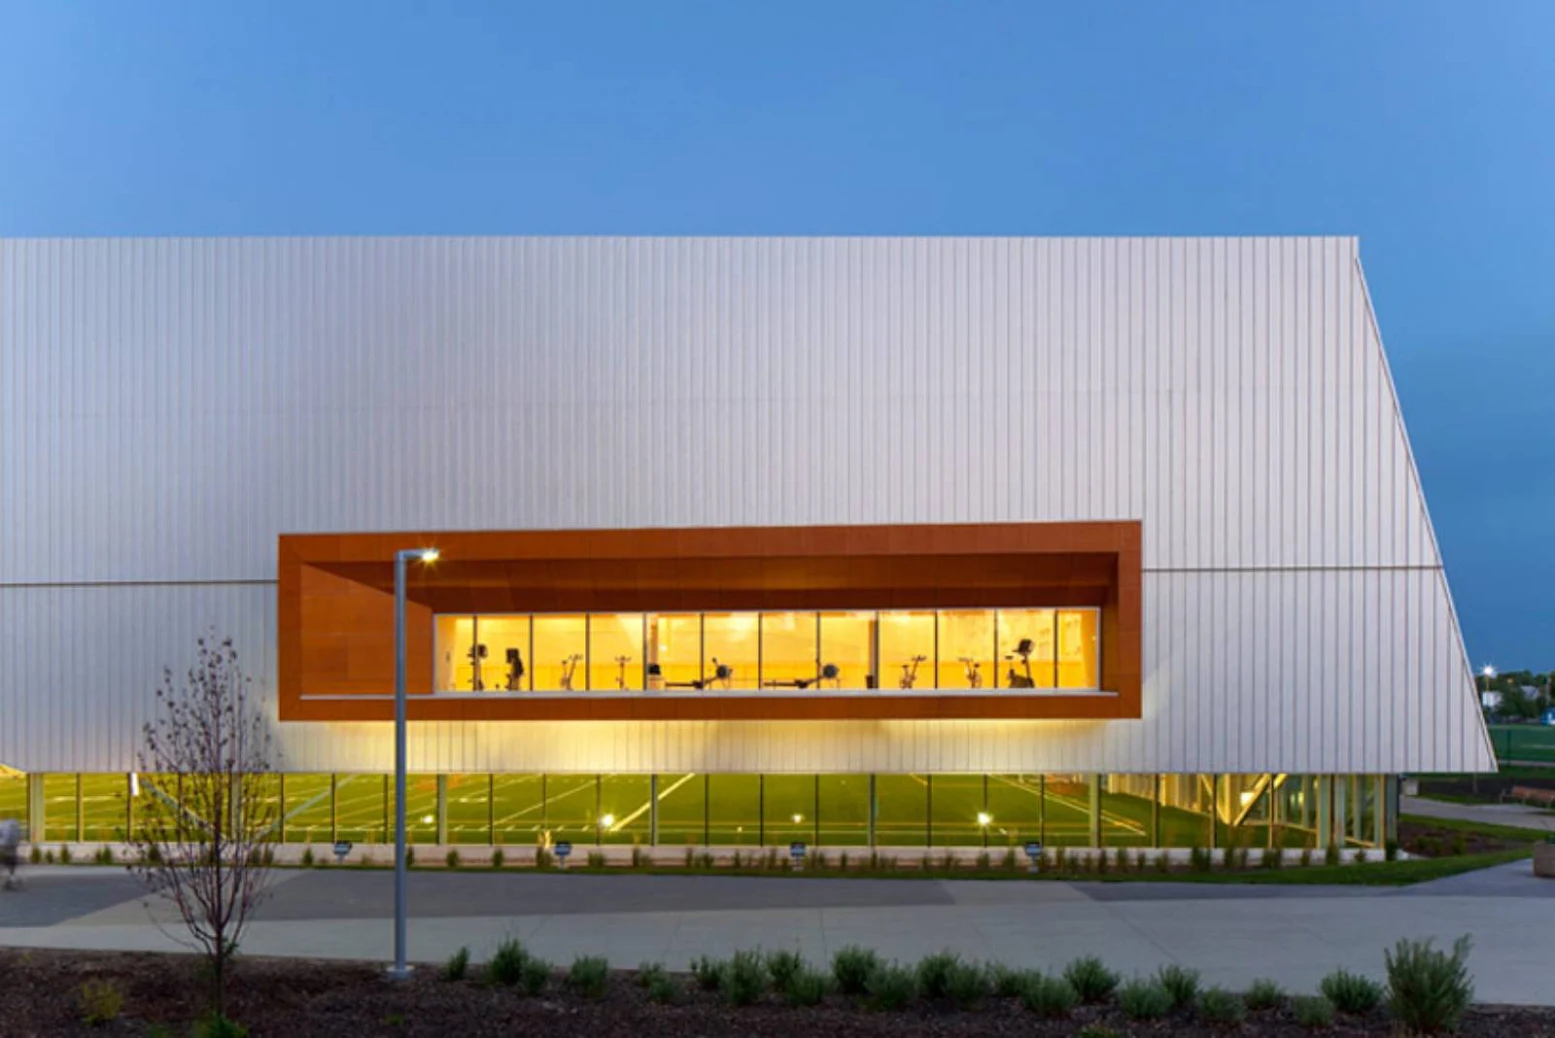 Commonwealth Community Recreation Center by MJMA